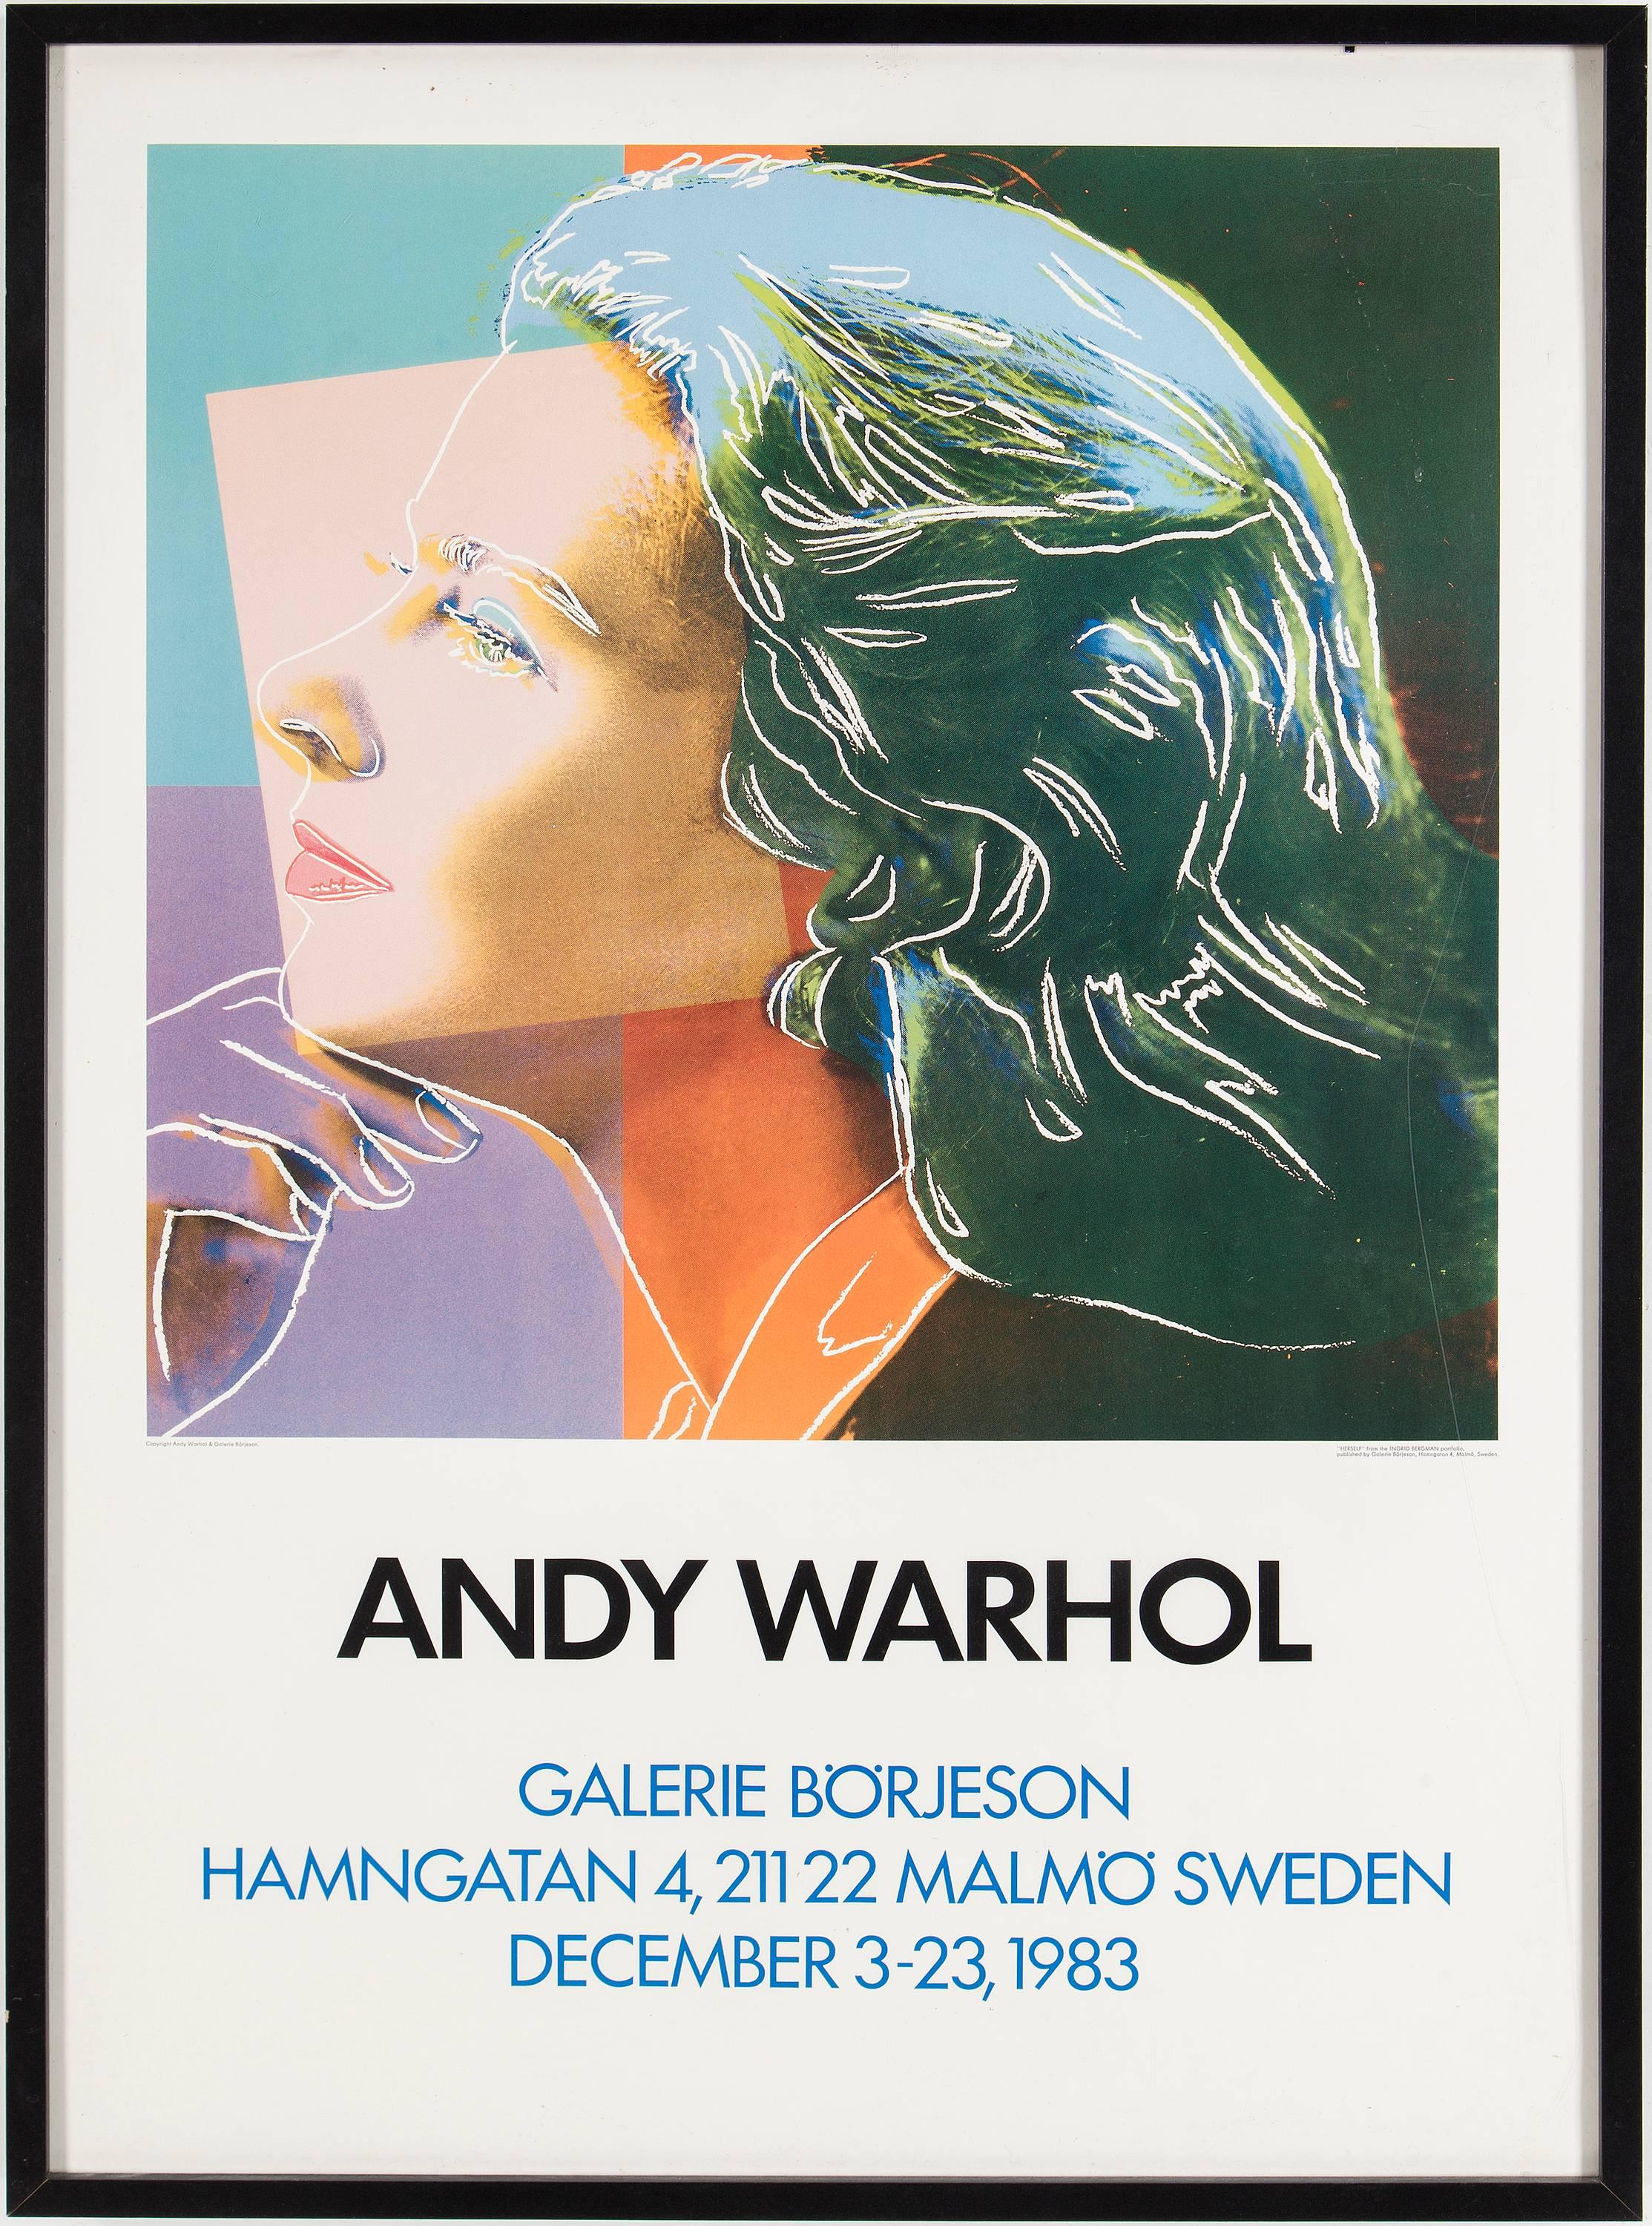 Three images after the Ingrid Bergman series by the artist.  Vintage posters from Andy Warhol's exhibition in Galerie Borjeson in Malmo, Sweden in 1983. 

Offset lithograph printed on heavy edition stock paper. Posters are black framed with UV plexi.